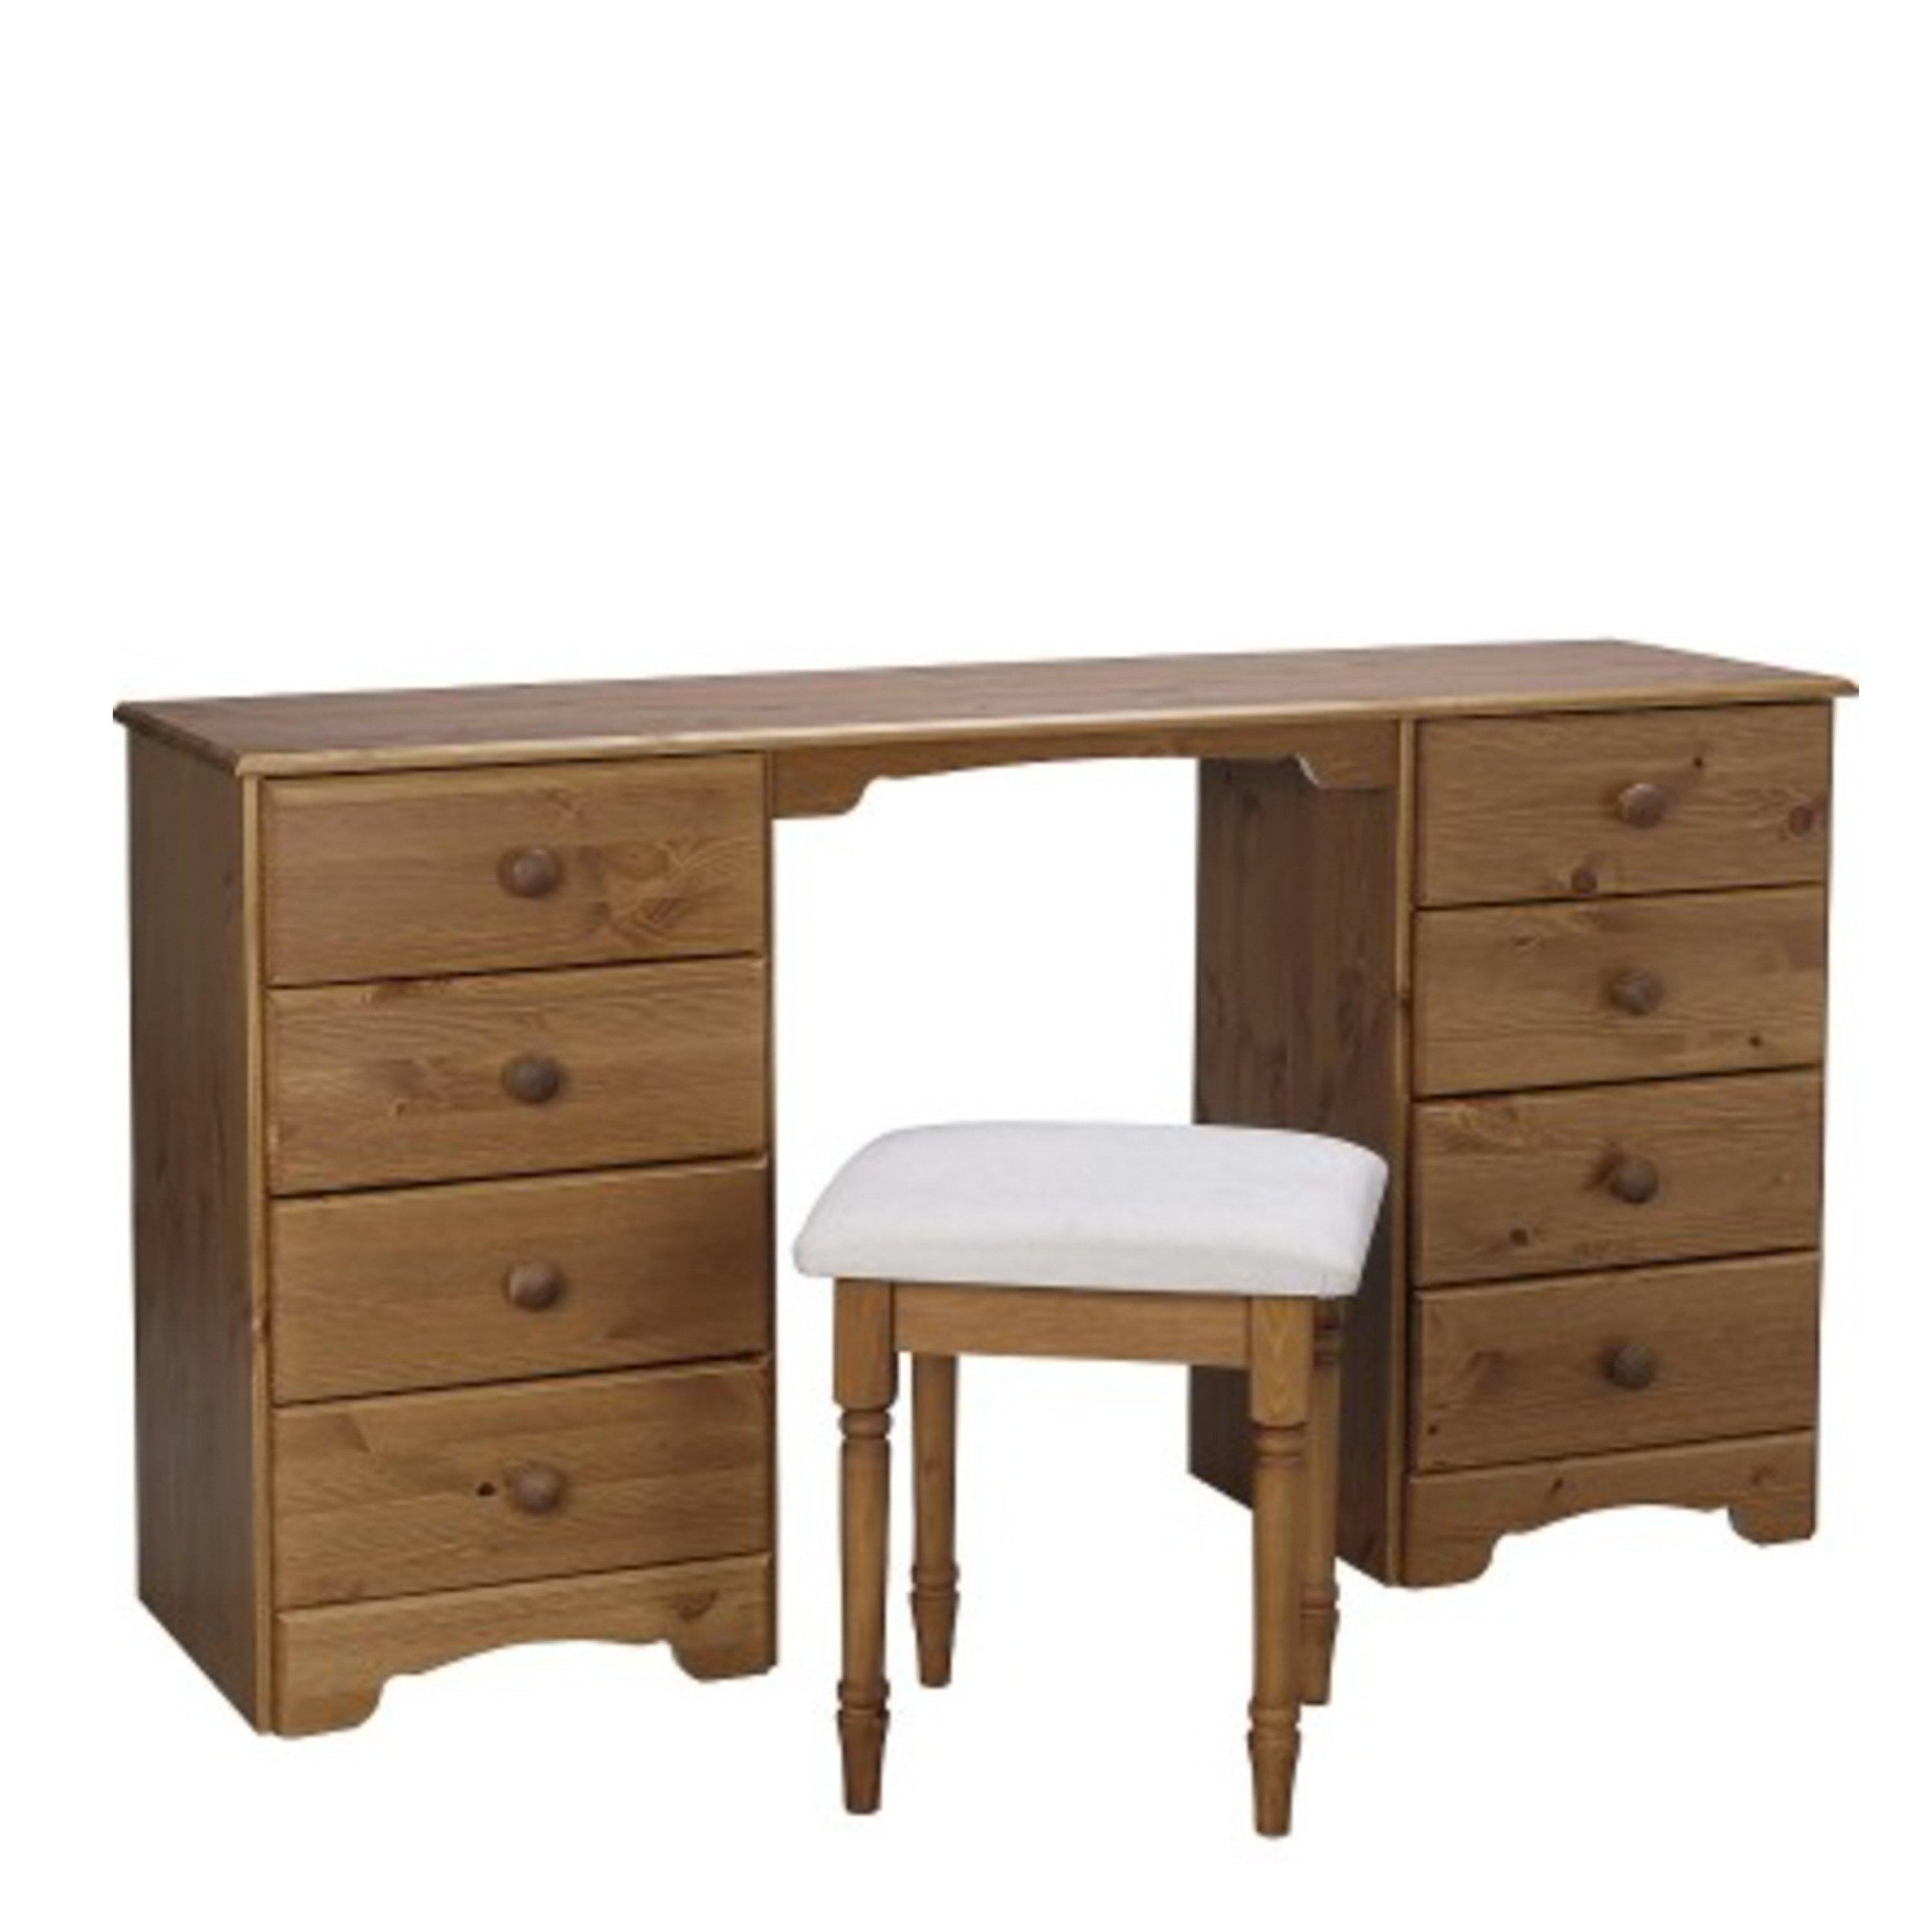 Durham Dressing Table 4+4 Drawers + chair - image 1